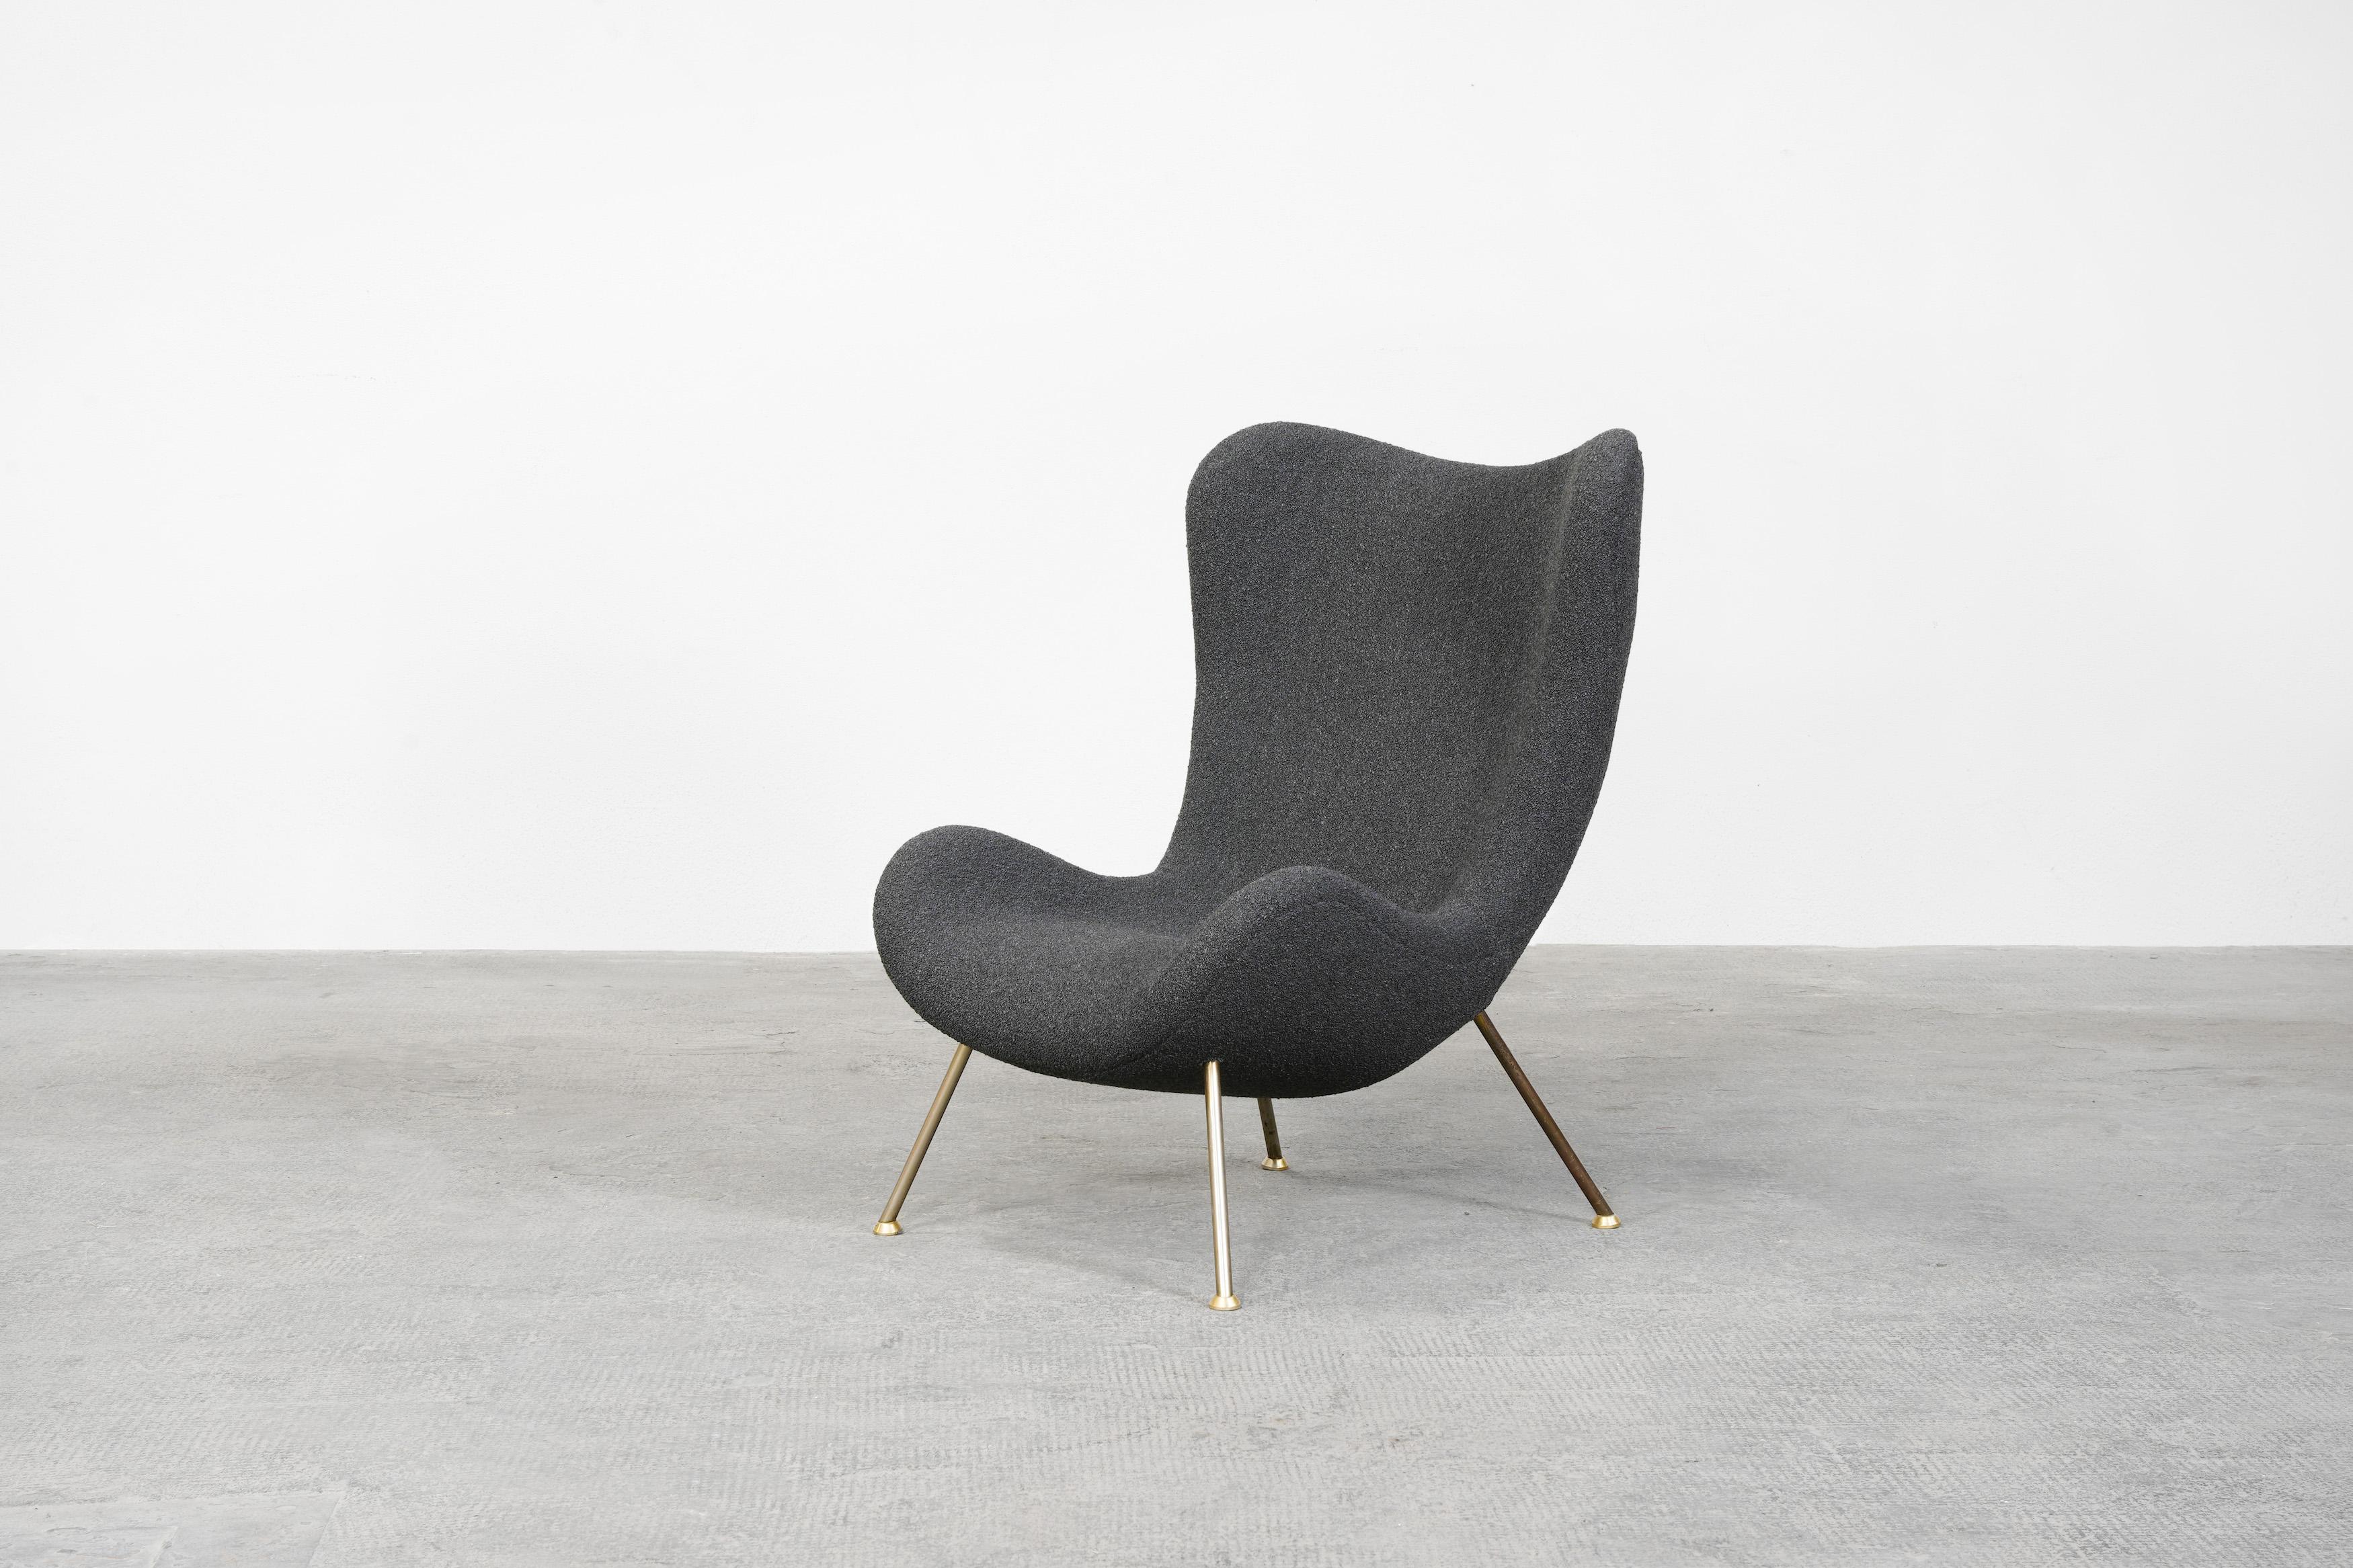 Lounge chair designed by Fritz Neth and produced by Correcta in Germany, 1955.
Organically shaped seat shell on gold-plated metal legs and with new upholstery, in high-quality grey boucle. 
The chair is extremely comfortable and comes in excellent